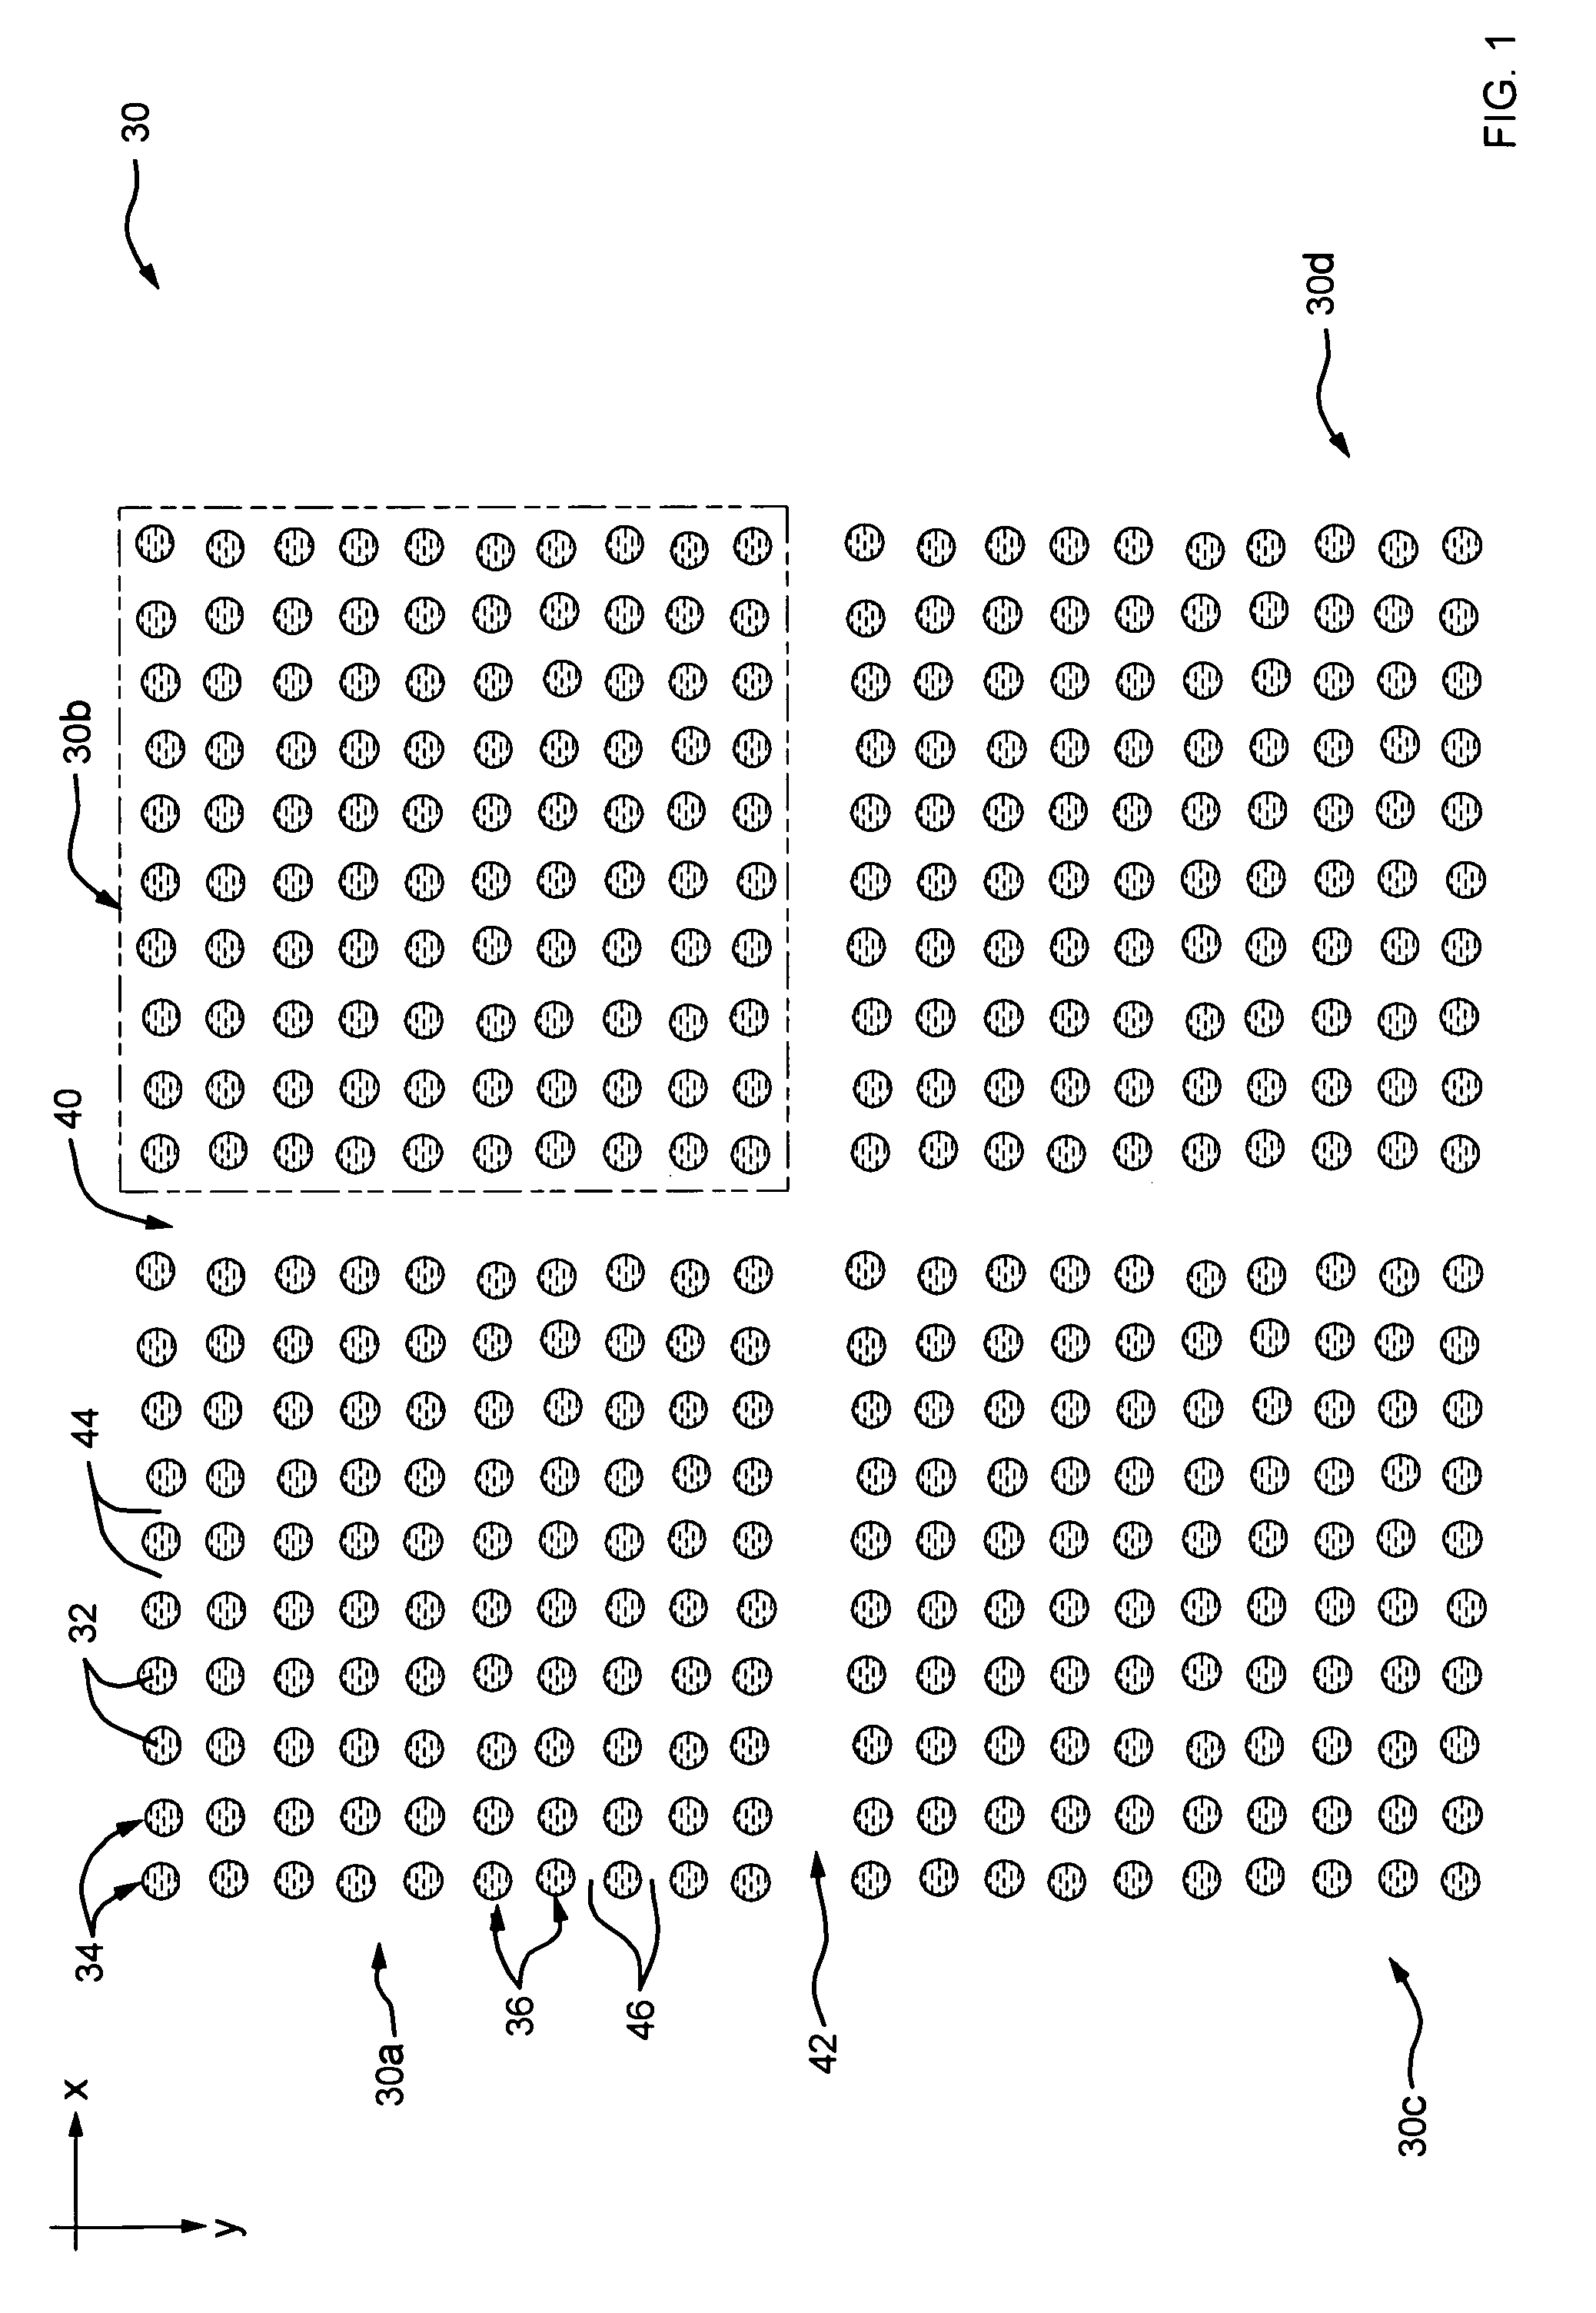 Method and apparatus for automatically segmenting a microarray image